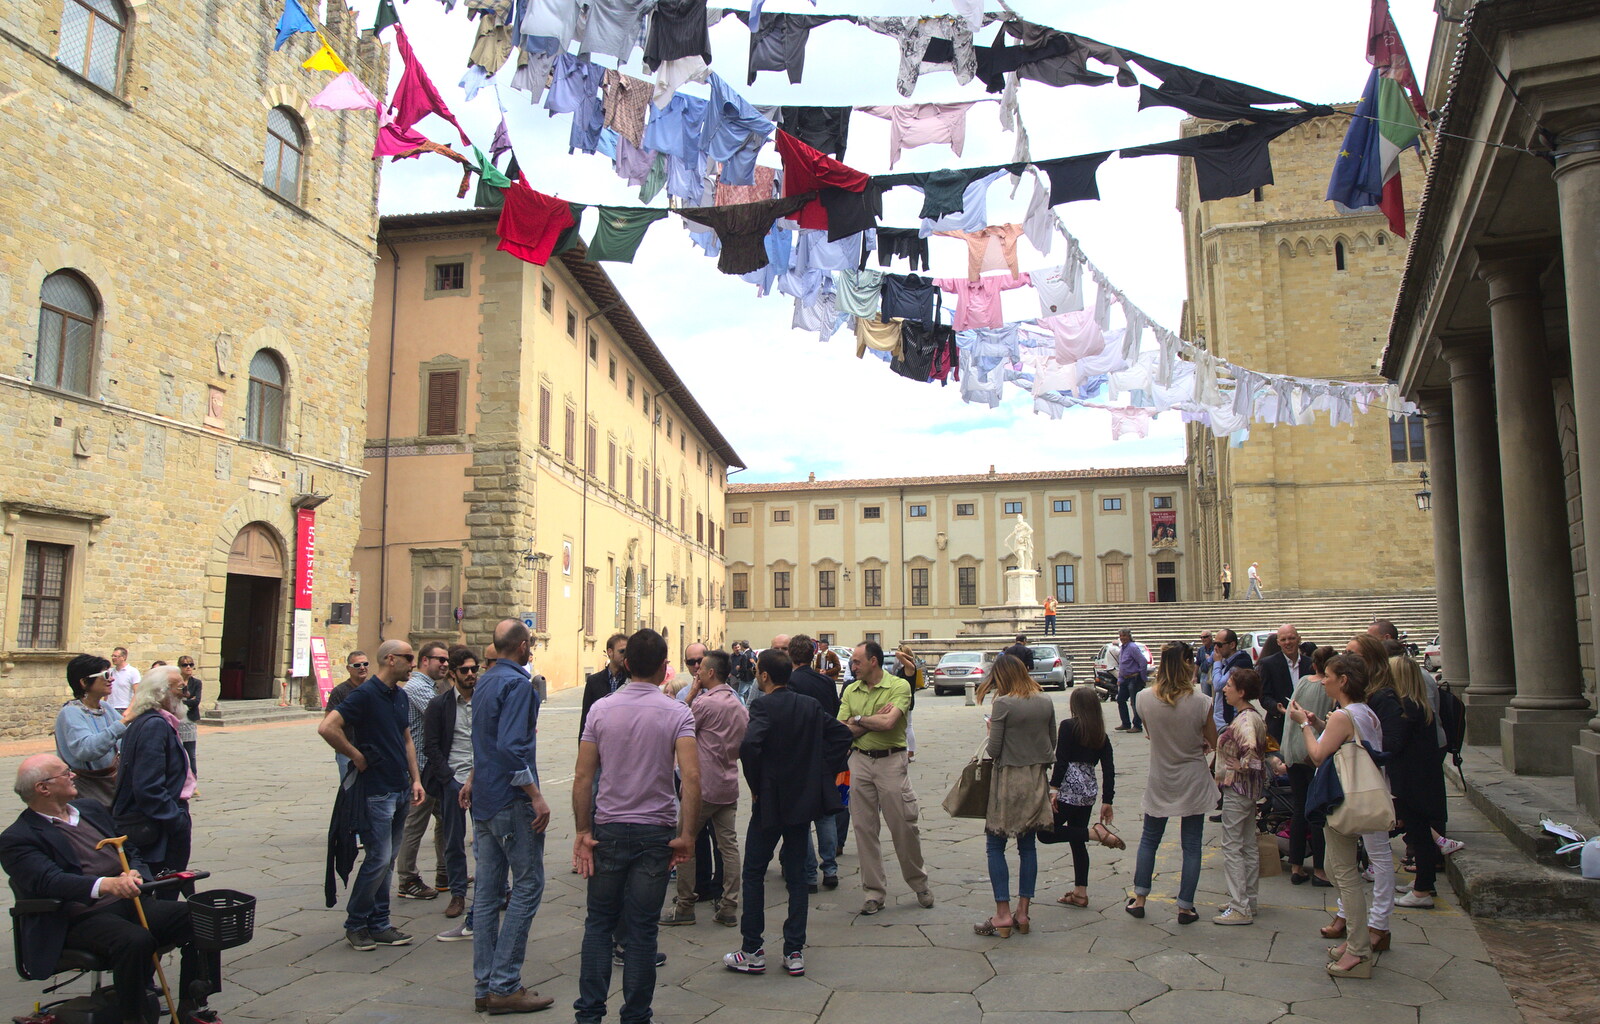 The crowds are out under the washing from Italian Weddings, Saracens and Swimming Pools, Arezzo, Tuscany - 12th June 2013